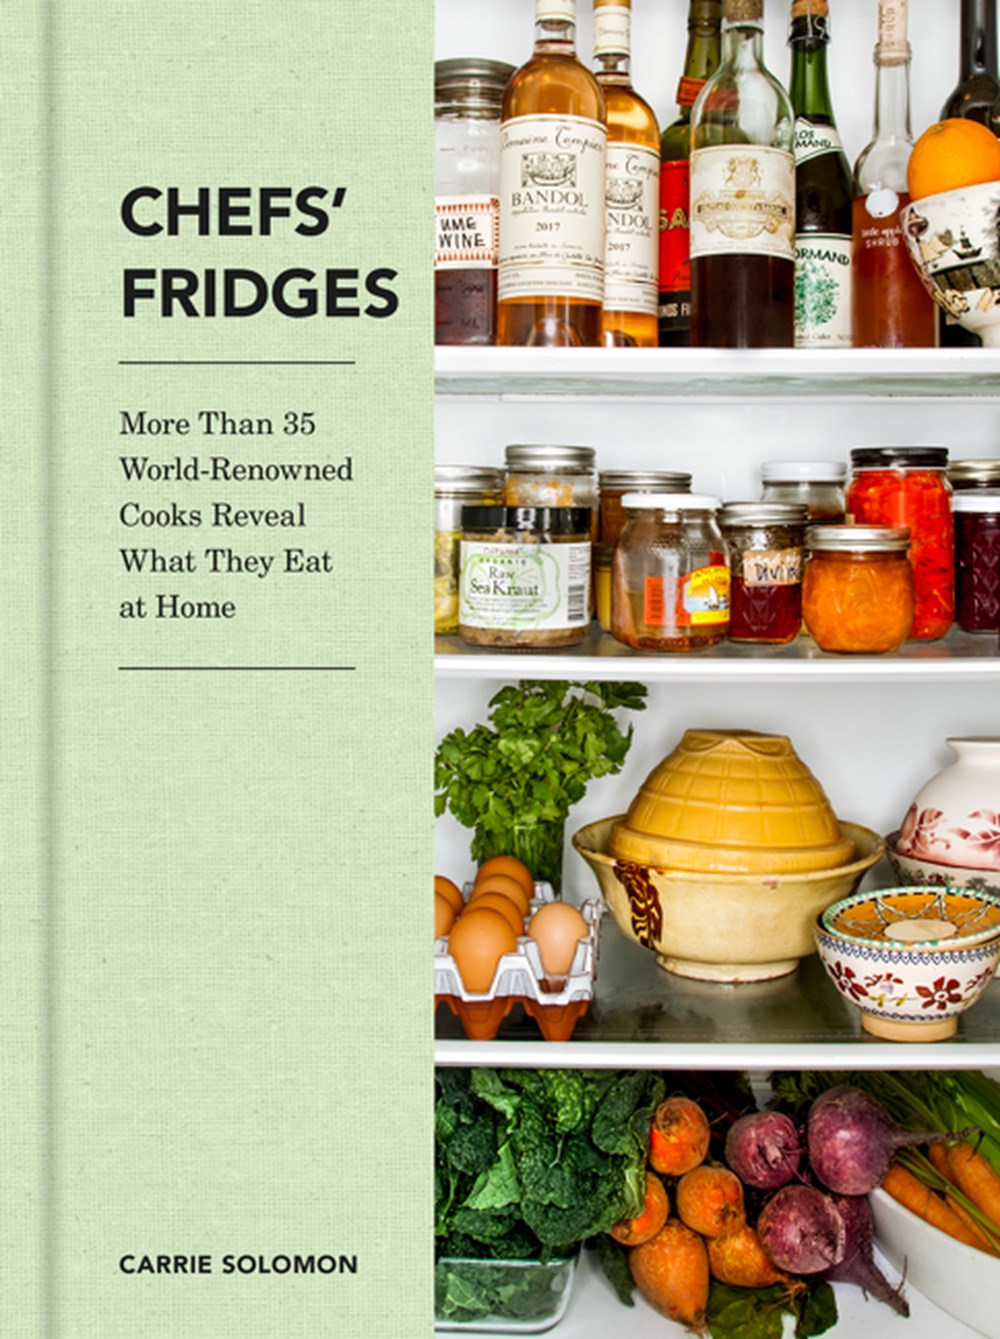 Chefs' Fridges: More Than 35 World-Renowned Cooks Reveal What They Eat at Home